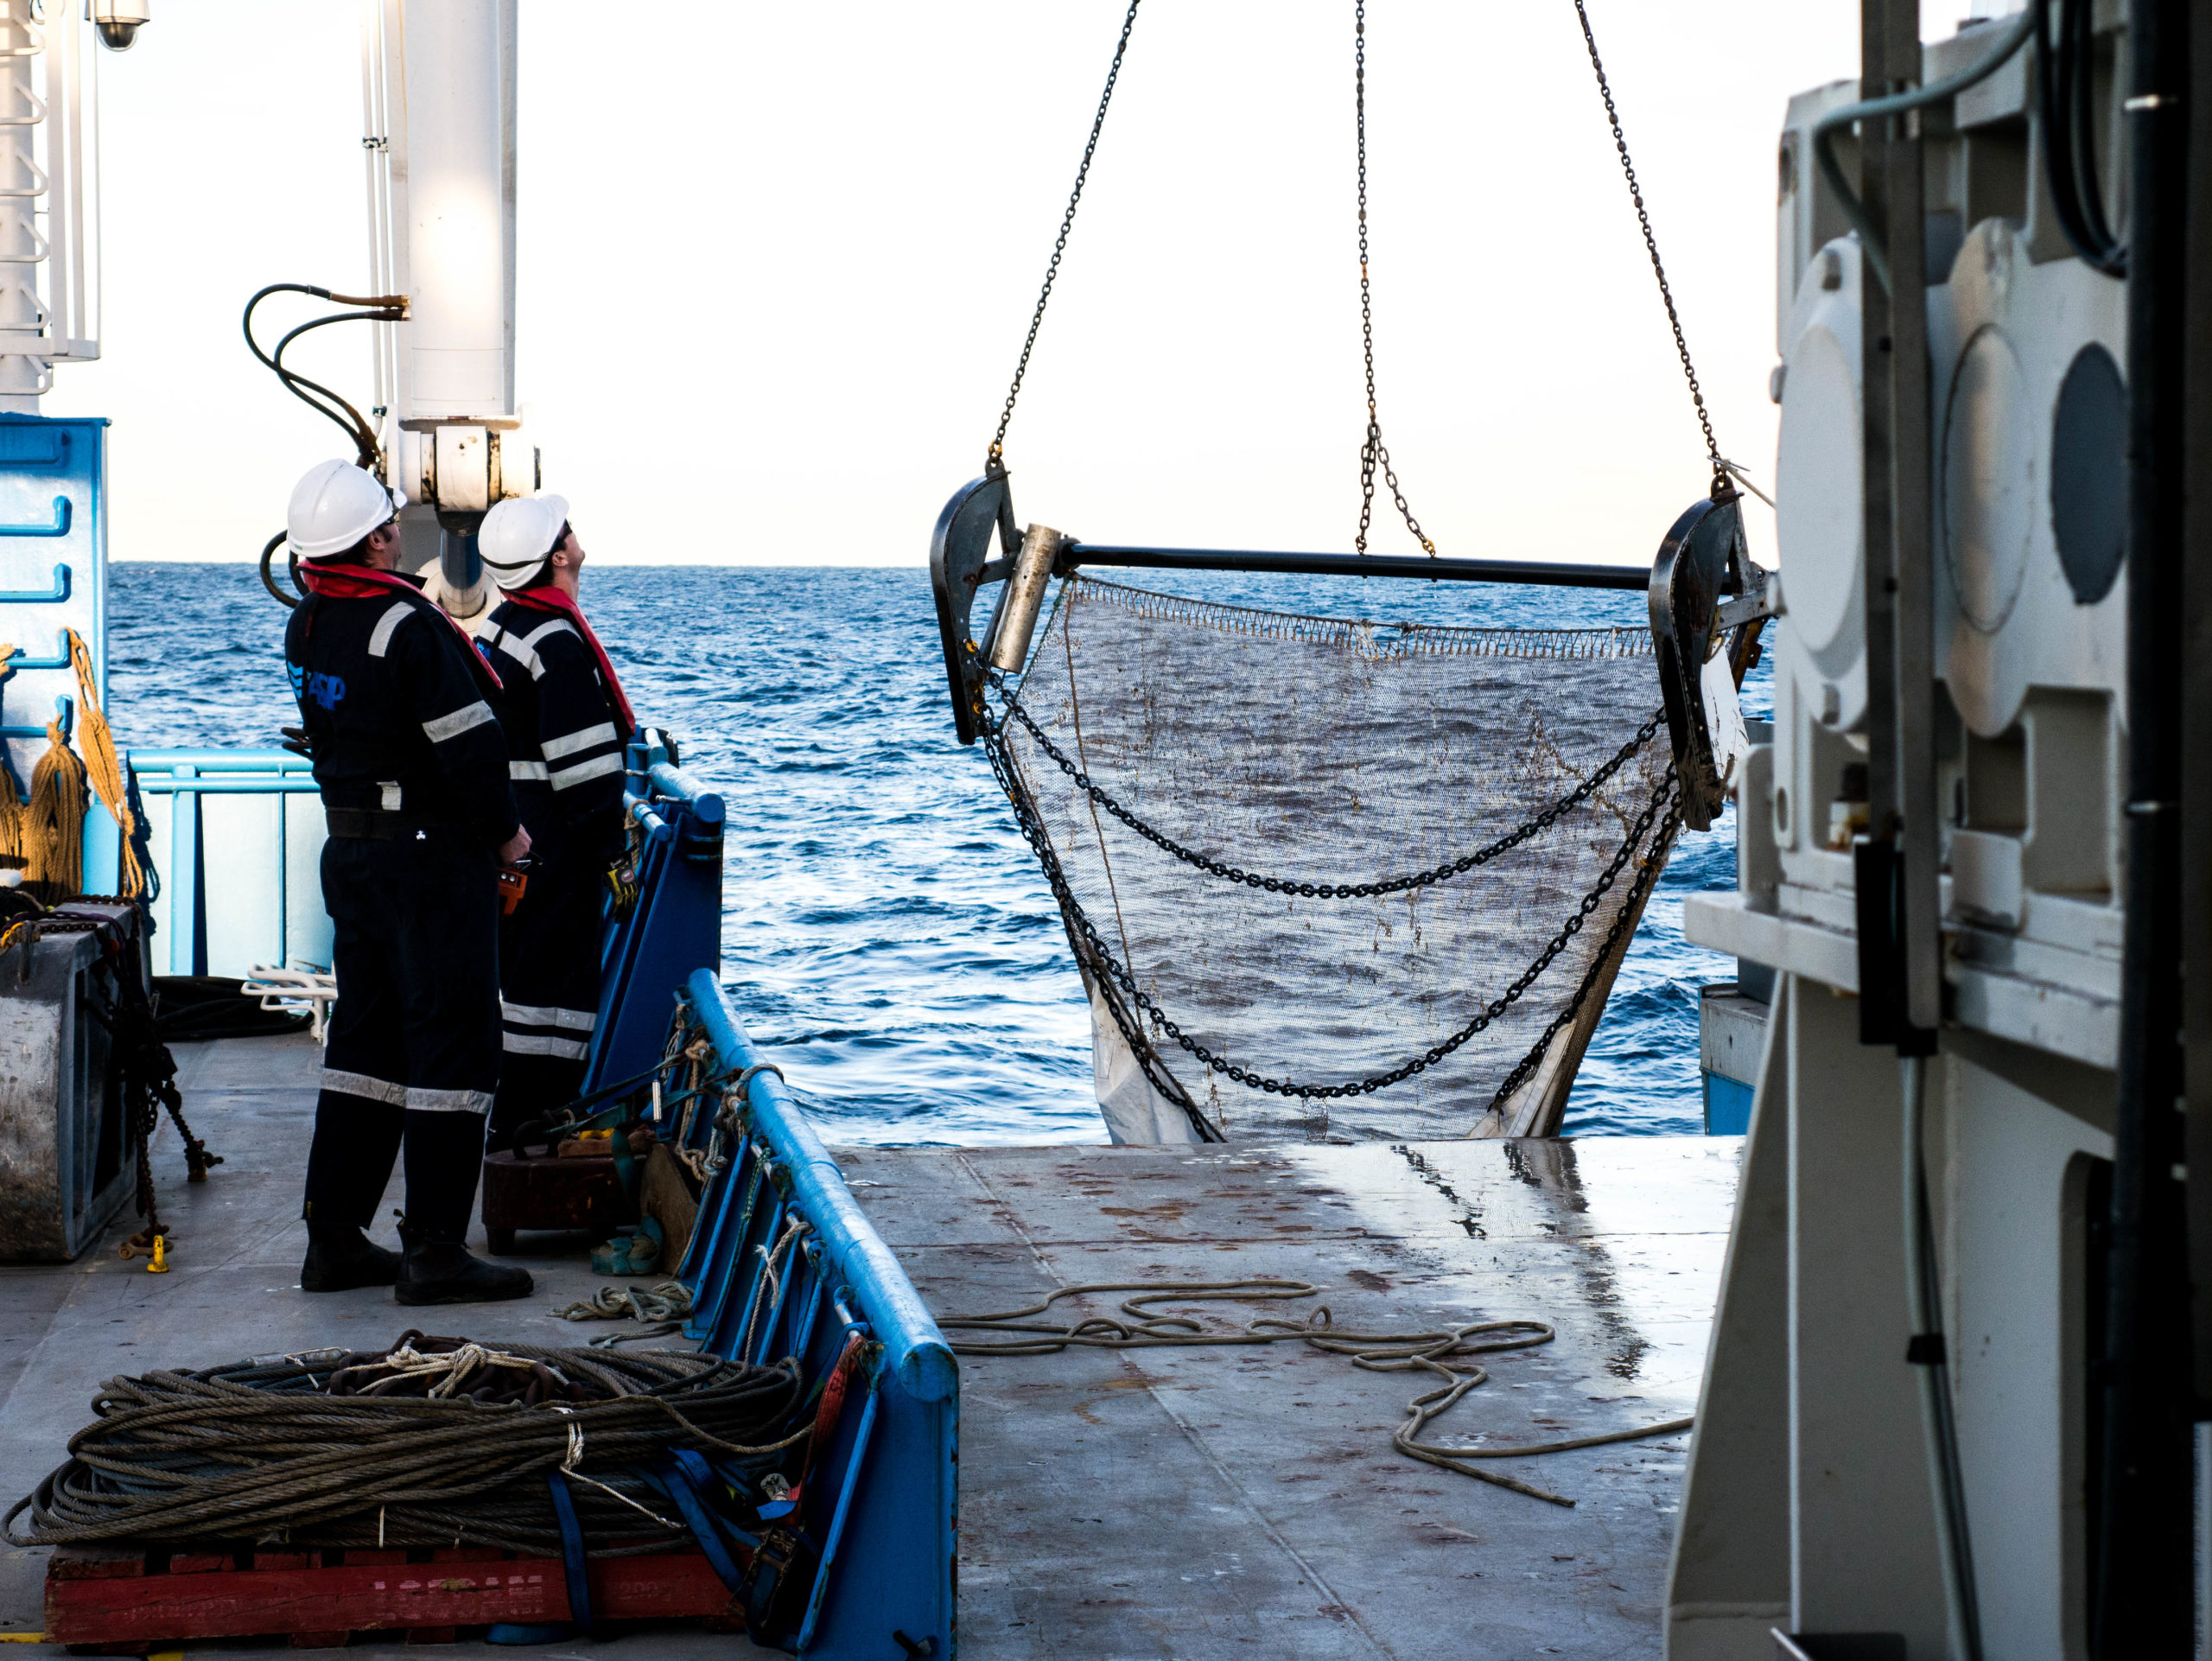 Two people aboard a ship watching a large net being hauled back onto the deck.